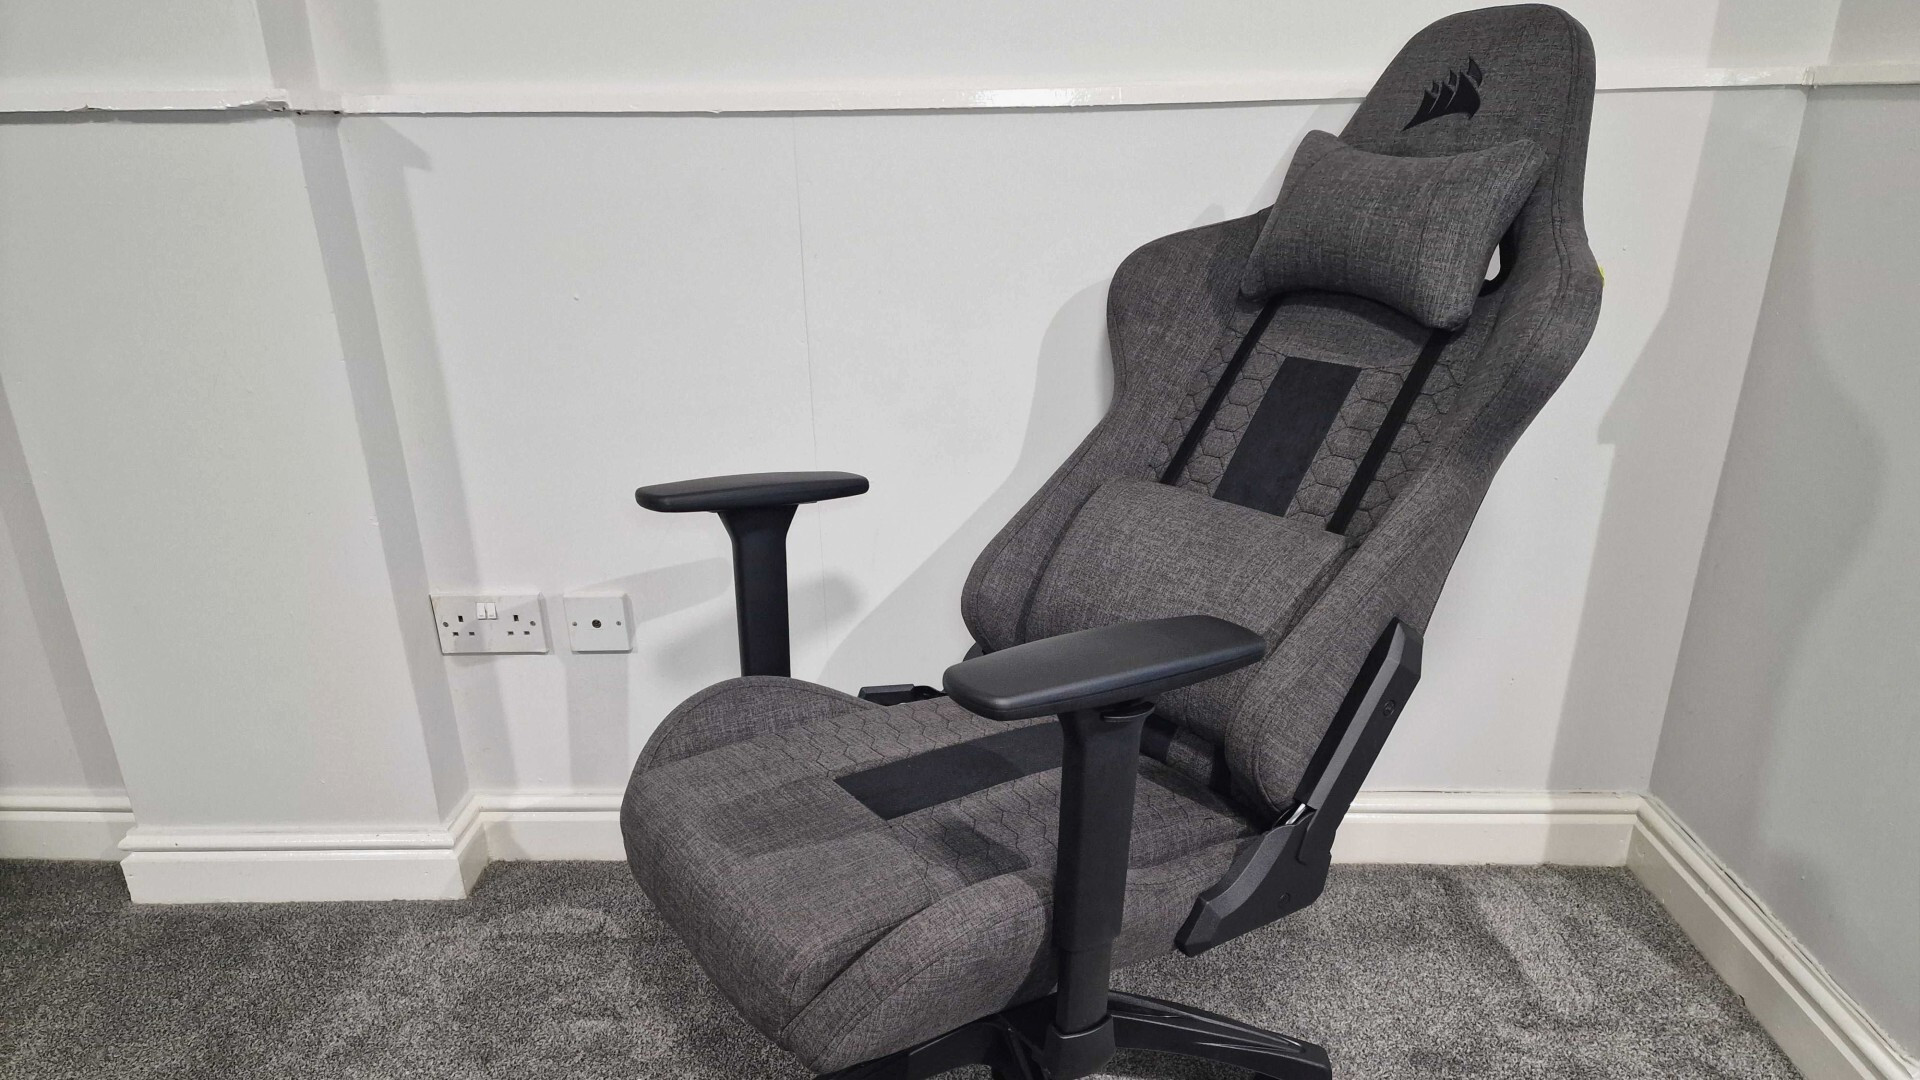 Corsair TC100 Comfortable review: A gaming chair, backrest reclines at a sharp angle